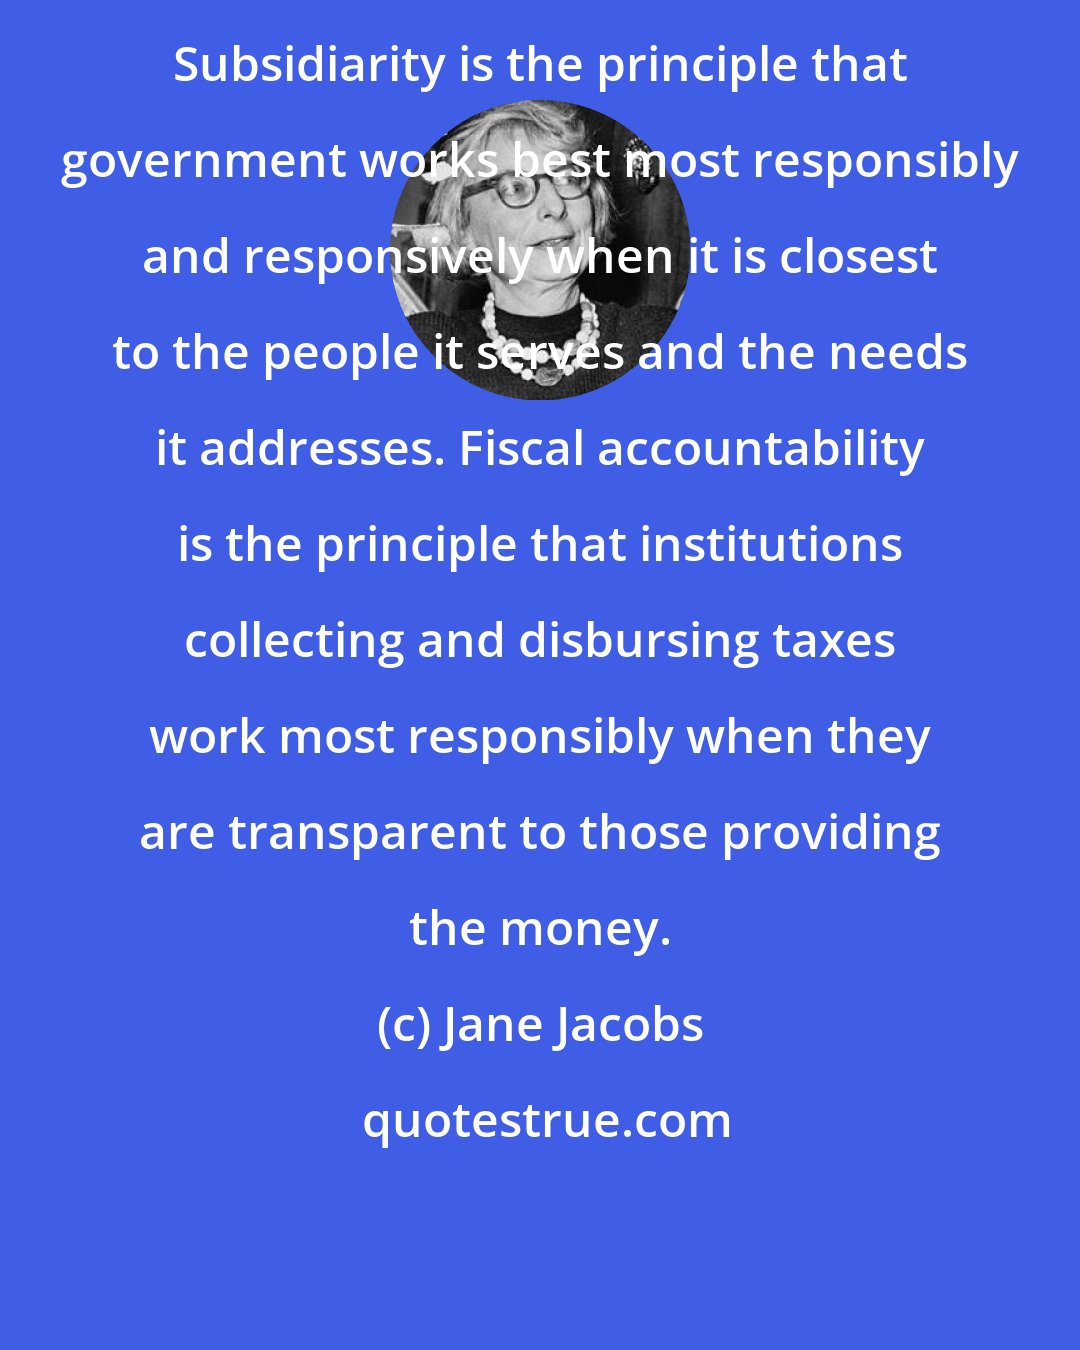 Jane Jacobs: Subsidiarity is the principle that government works best most responsibly and responsively when it is closest to the people it serves and the needs it addresses. Fiscal accountability is the principle that institutions collecting and disbursing taxes work most responsibly when they are transparent to those providing the money.